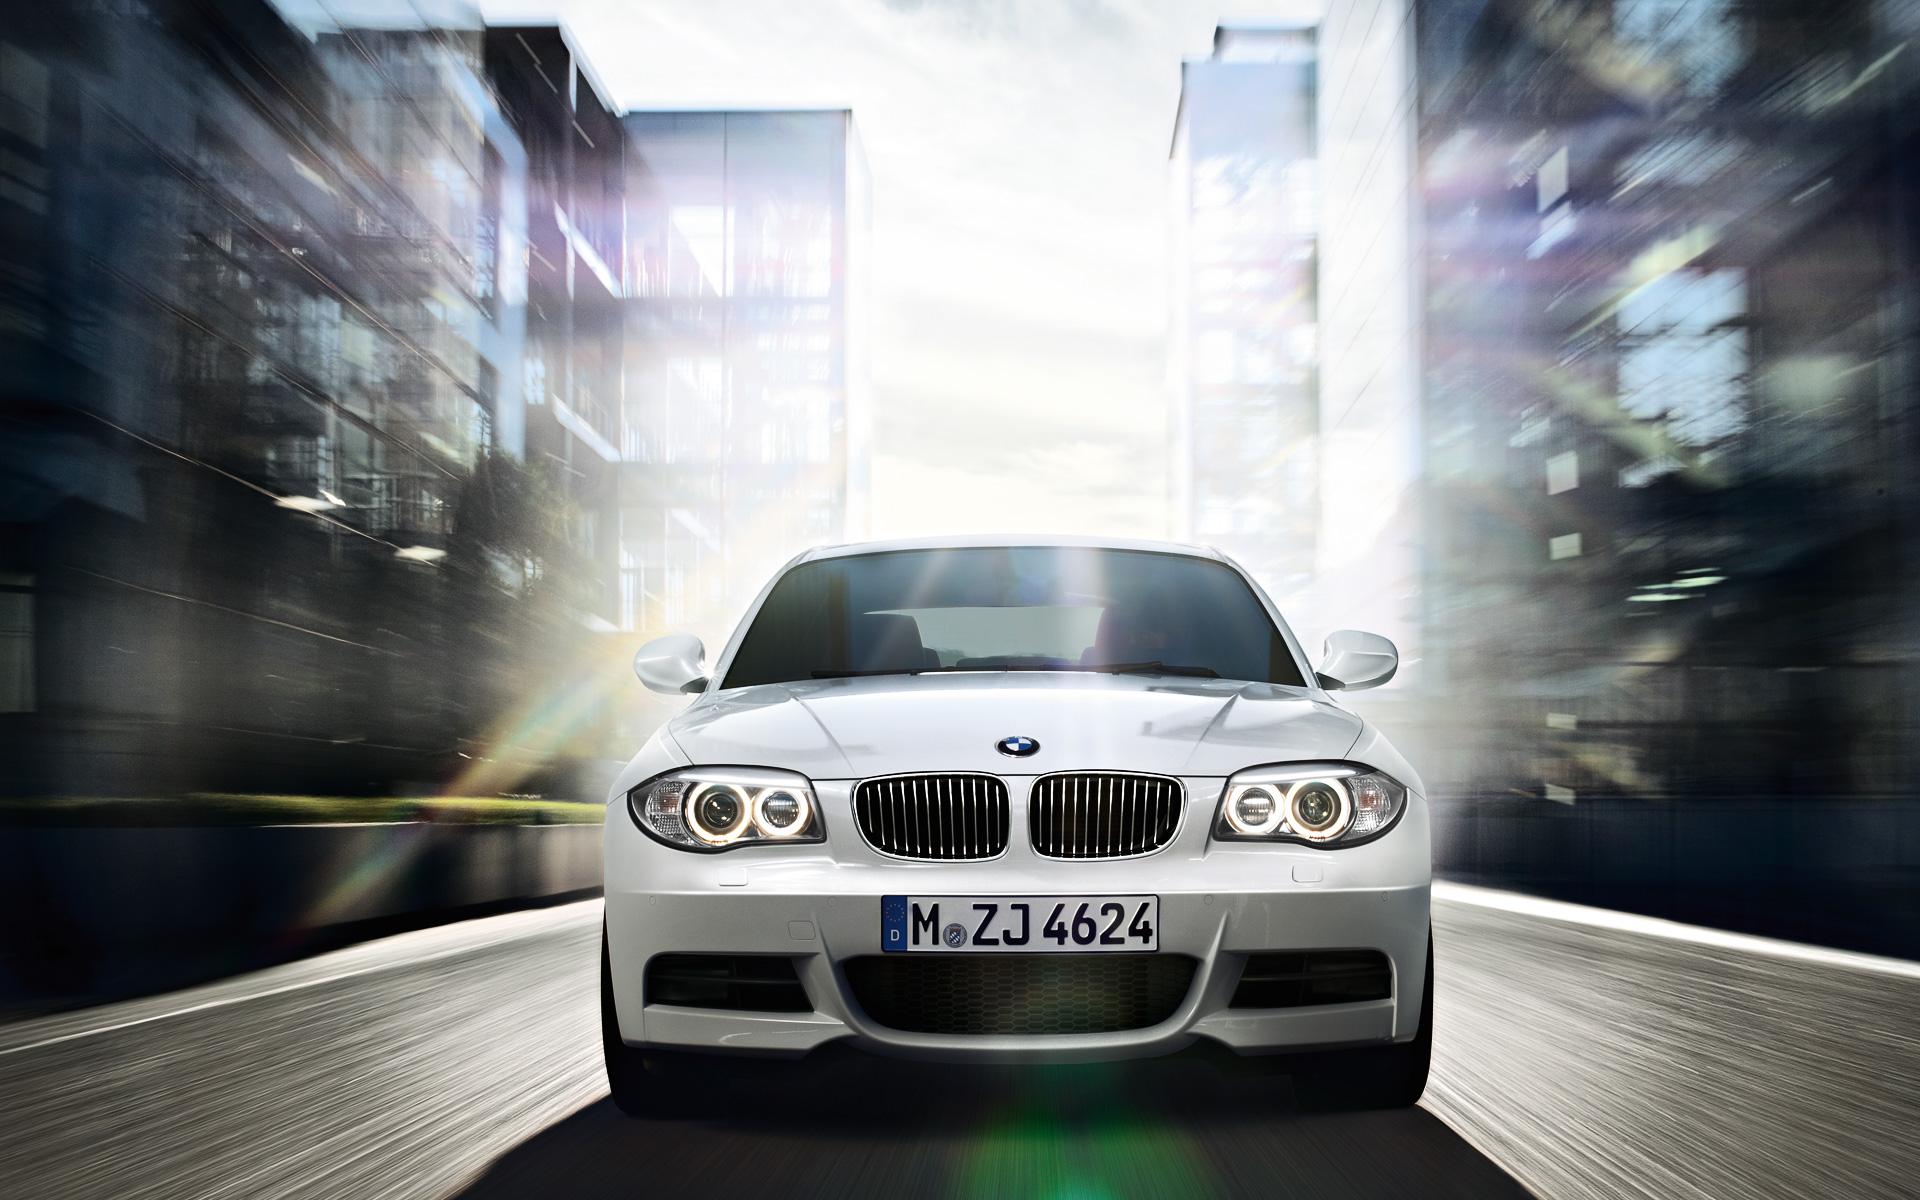 BMW 1 Series Wallpaper and Background Image